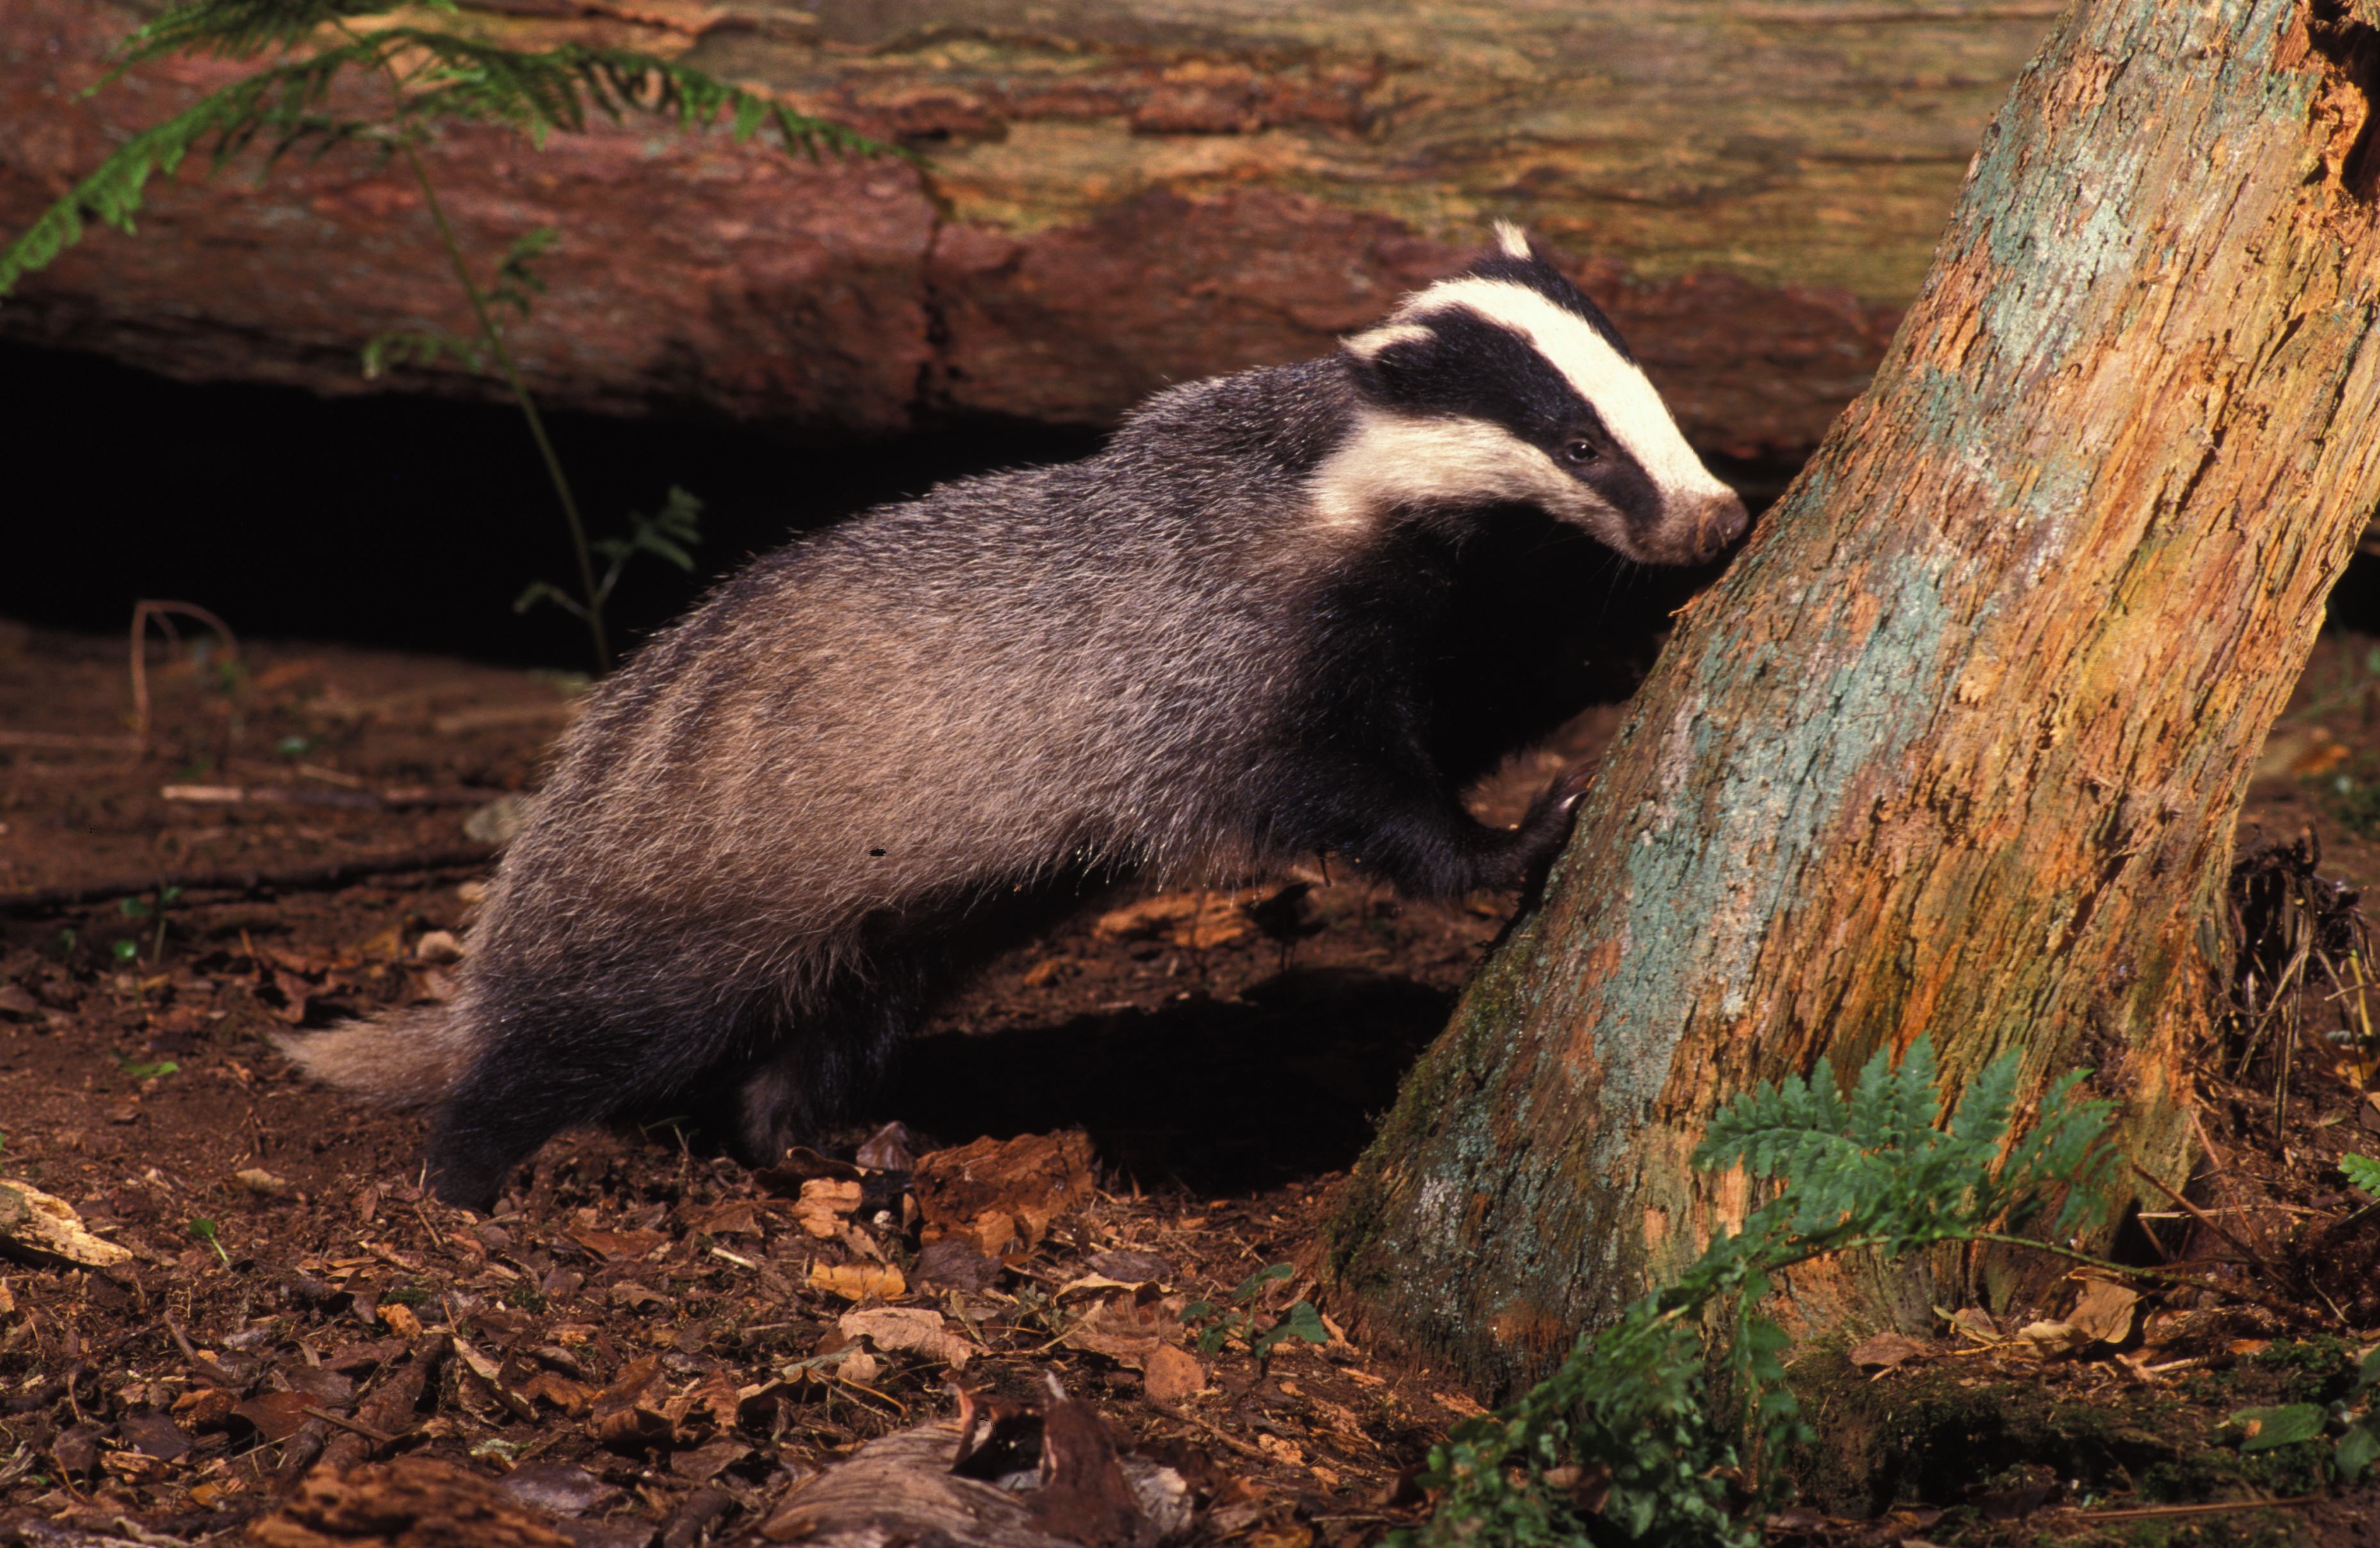 Badger perched against tree